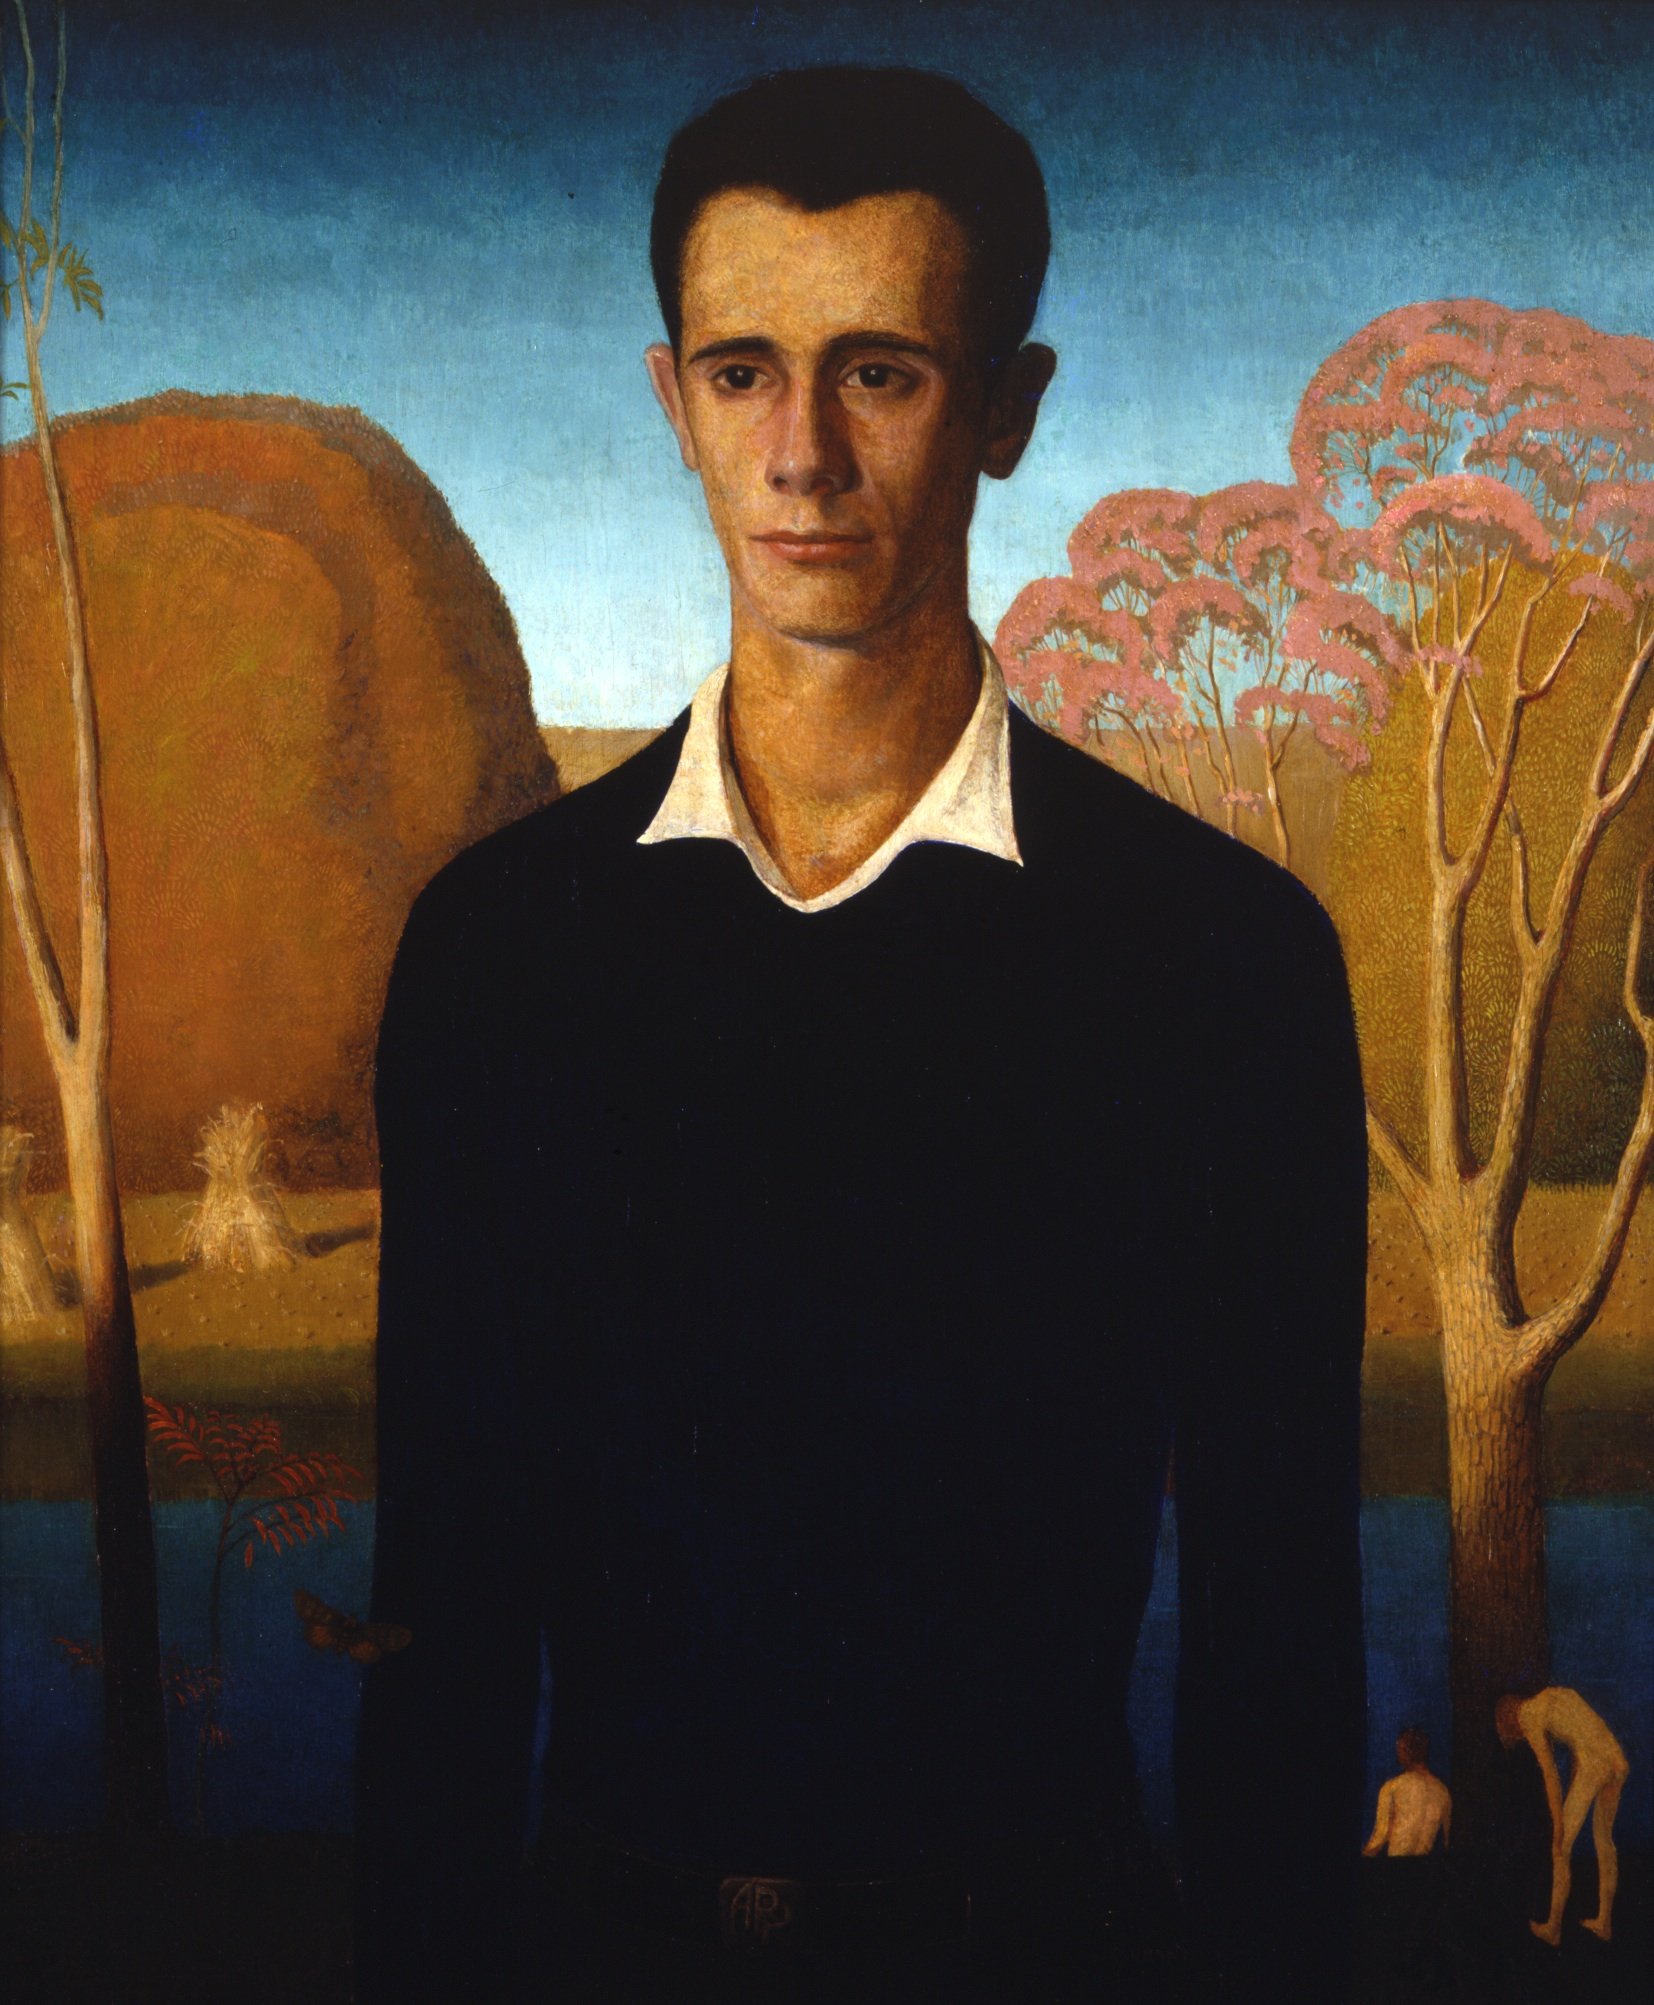 The central focus is a fully clothed male figure of Arnold Pyle, standing in the foreground of a serene rural landscape. He is depicted looking towards the distance with an expression of contemplation. Behind him, in the middle distance, two nude men are bathing in the calm waters of a river. The painting symbolizes the transition from youth to adulthood, with Arnold seemingly contemplating his own maturity in contrast to the more carefree actions of the bathing men.